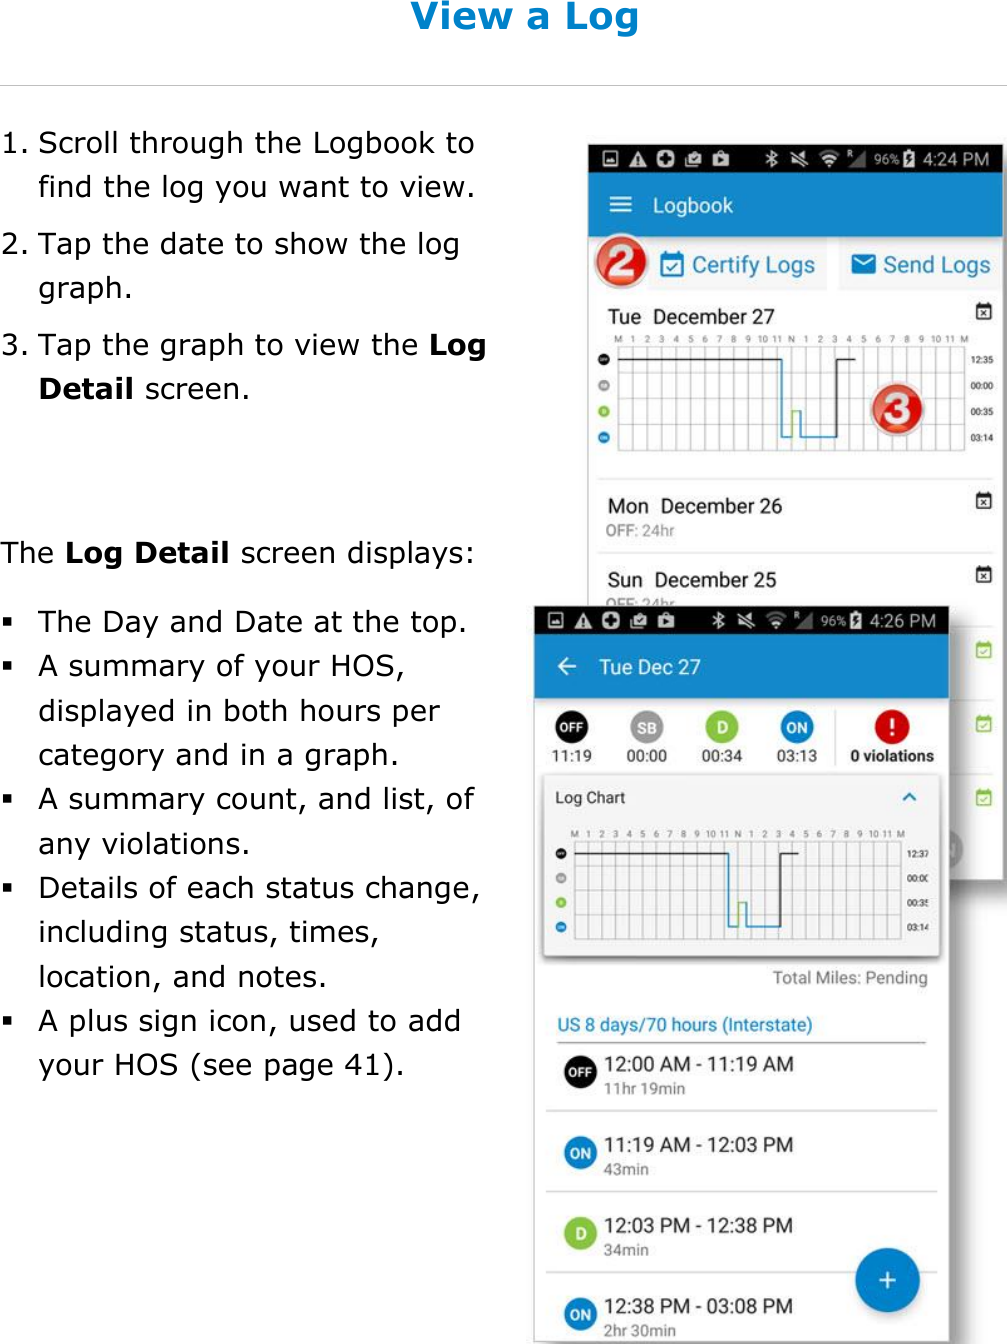 Manage My Logbook DriverConnect User Guide  40 © 2016-2017, Rand McNally, Inc. View a Log 1. Scroll through the Logbook to find the log you want to view. 2. Tap the date to show the log graph. 3. Tap the graph to view the Log Detail screen.  The Log Detail screen displays:  The Day and Date at the top.  A summary of your HOS, displayed in both hours per category and in a graph.  A summary count, and list, of any violations.  Details of each status change, including status, times, location, and notes.  A plus sign icon, used to add your HOS (see page 41).    